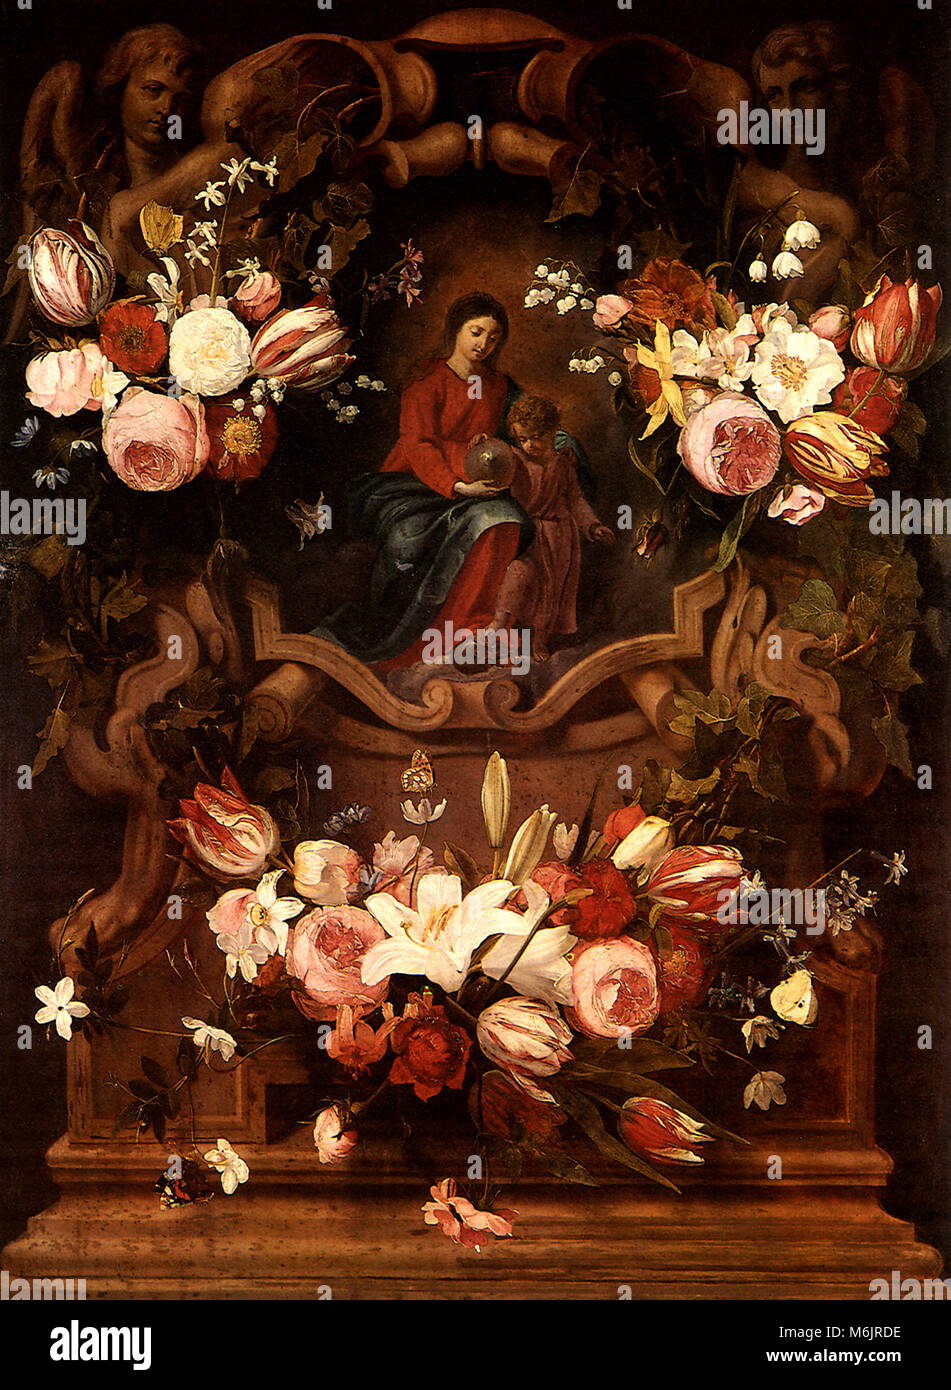 Floral Wreath with Madonna and Child, Seghers, Daniel, 1650. Stock Photo